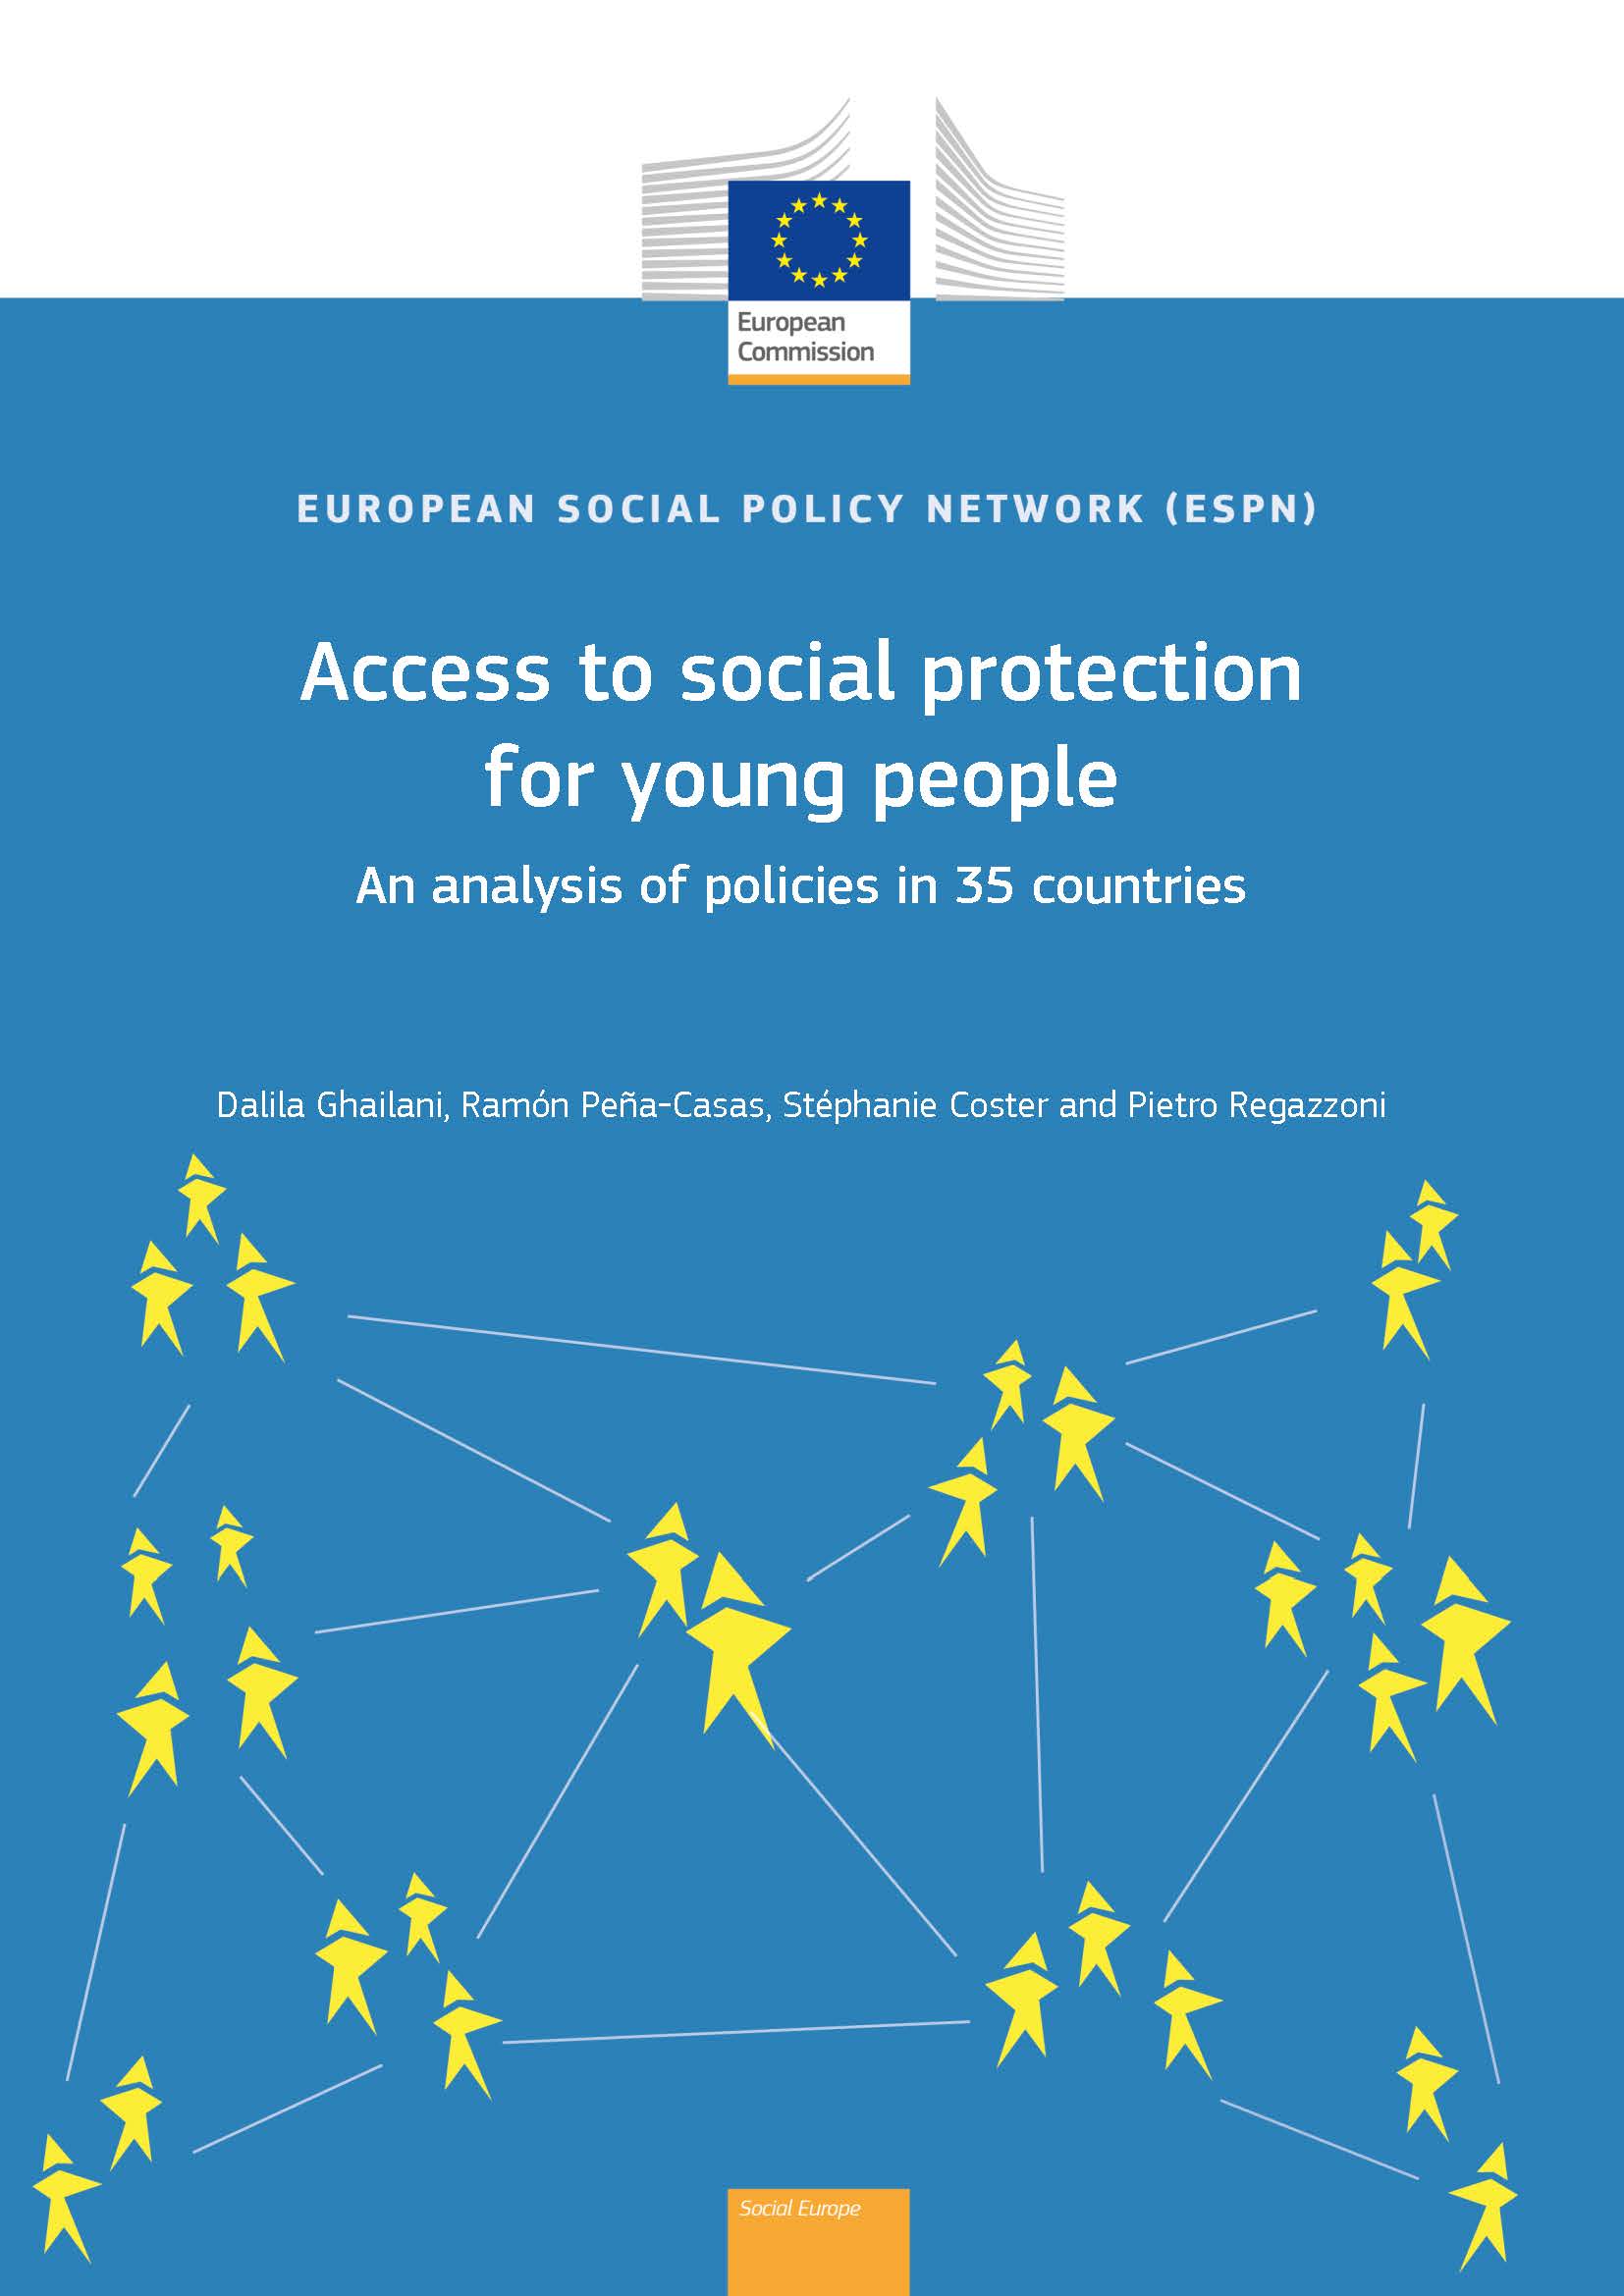 Access to social protection for young people. An analysis of policies in 35 countries